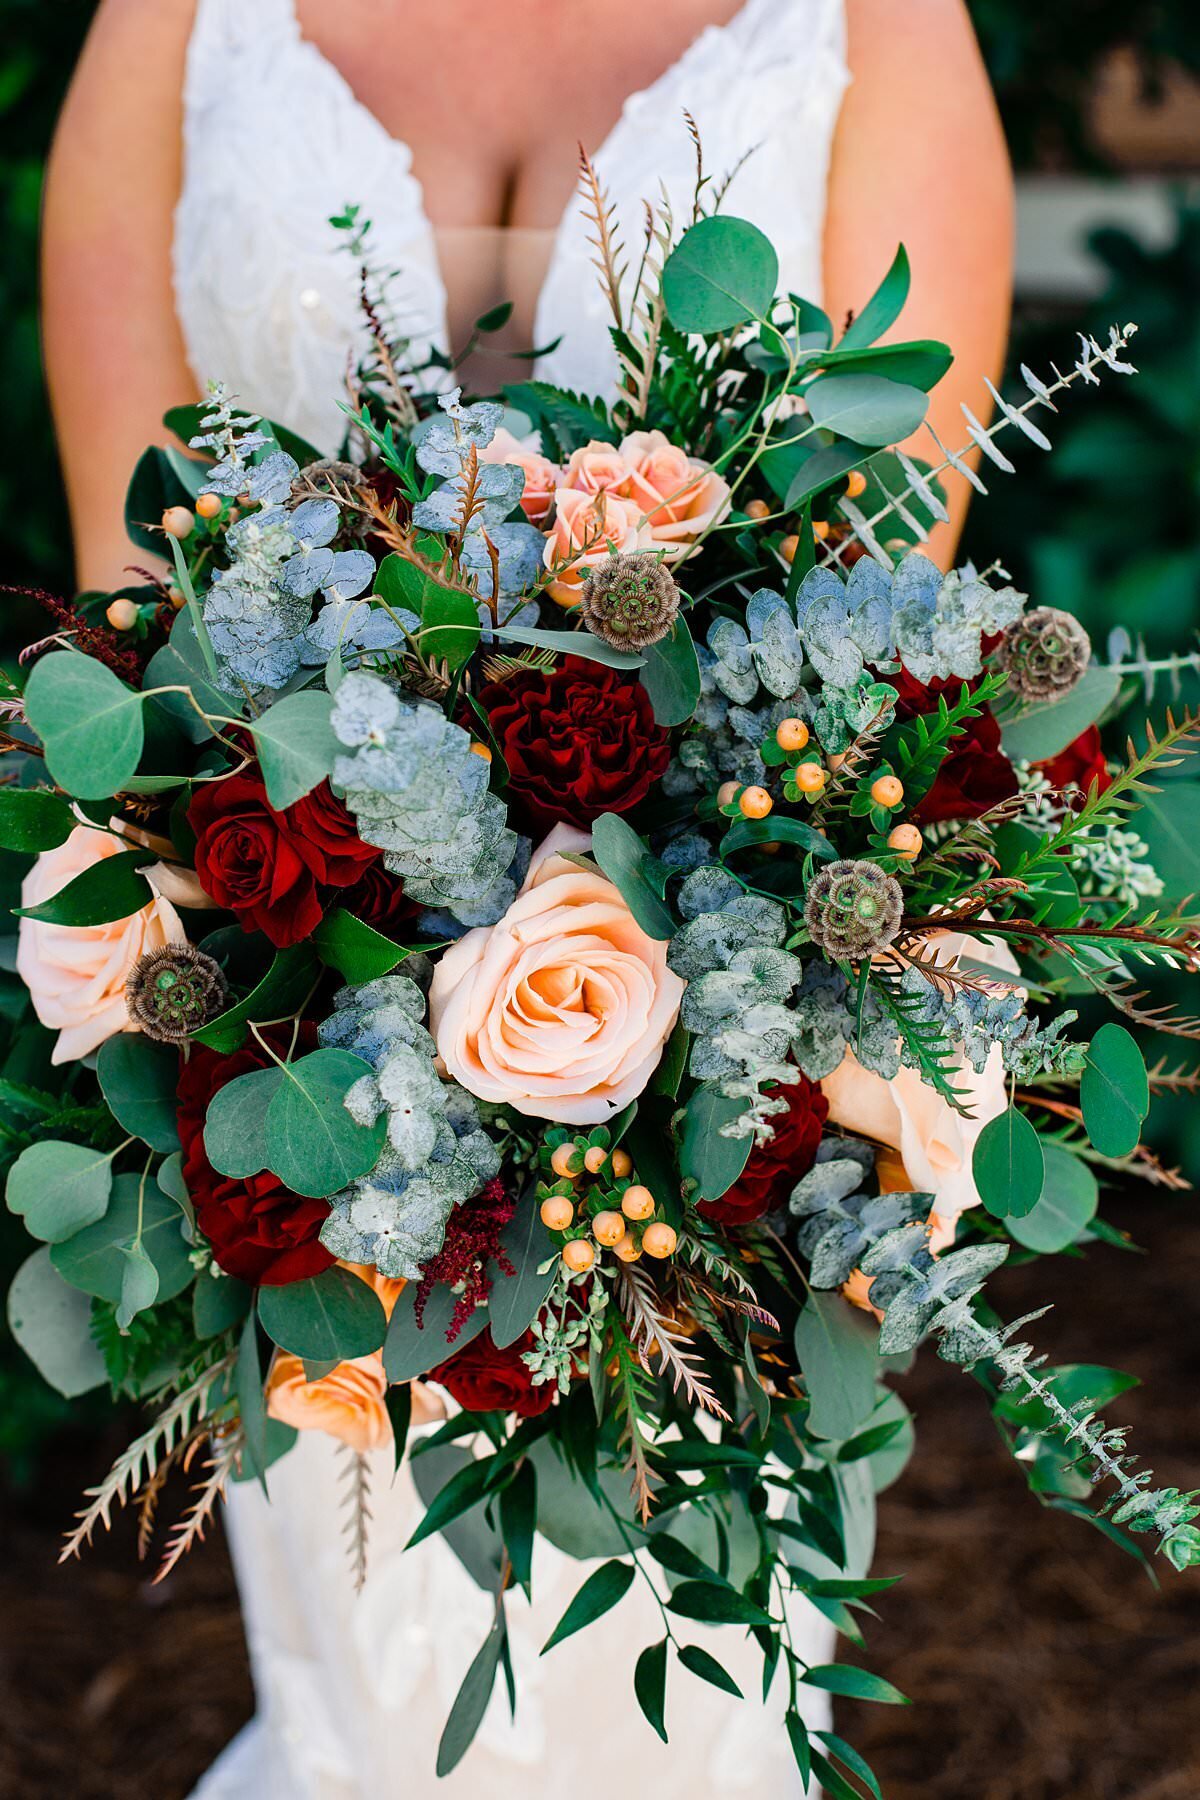 Bride holding large bouquet filled with different types of eucalyptus